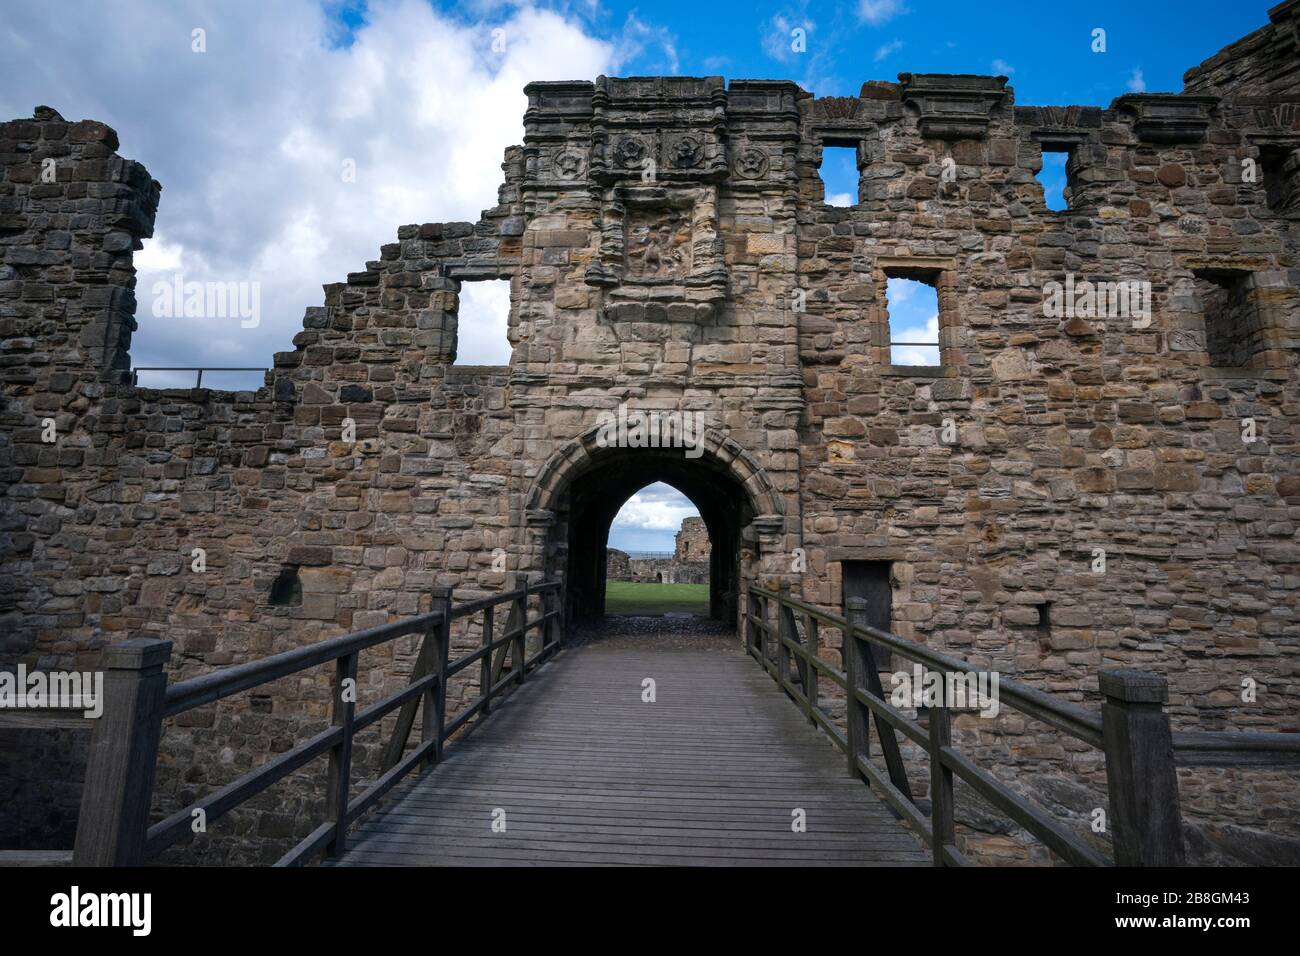 Drawbridge leading to St. Andrews Castle ruins dating from 13th century, a popular tourist draw in this famous university town, St. Andrews, Scotland, Stock Photo